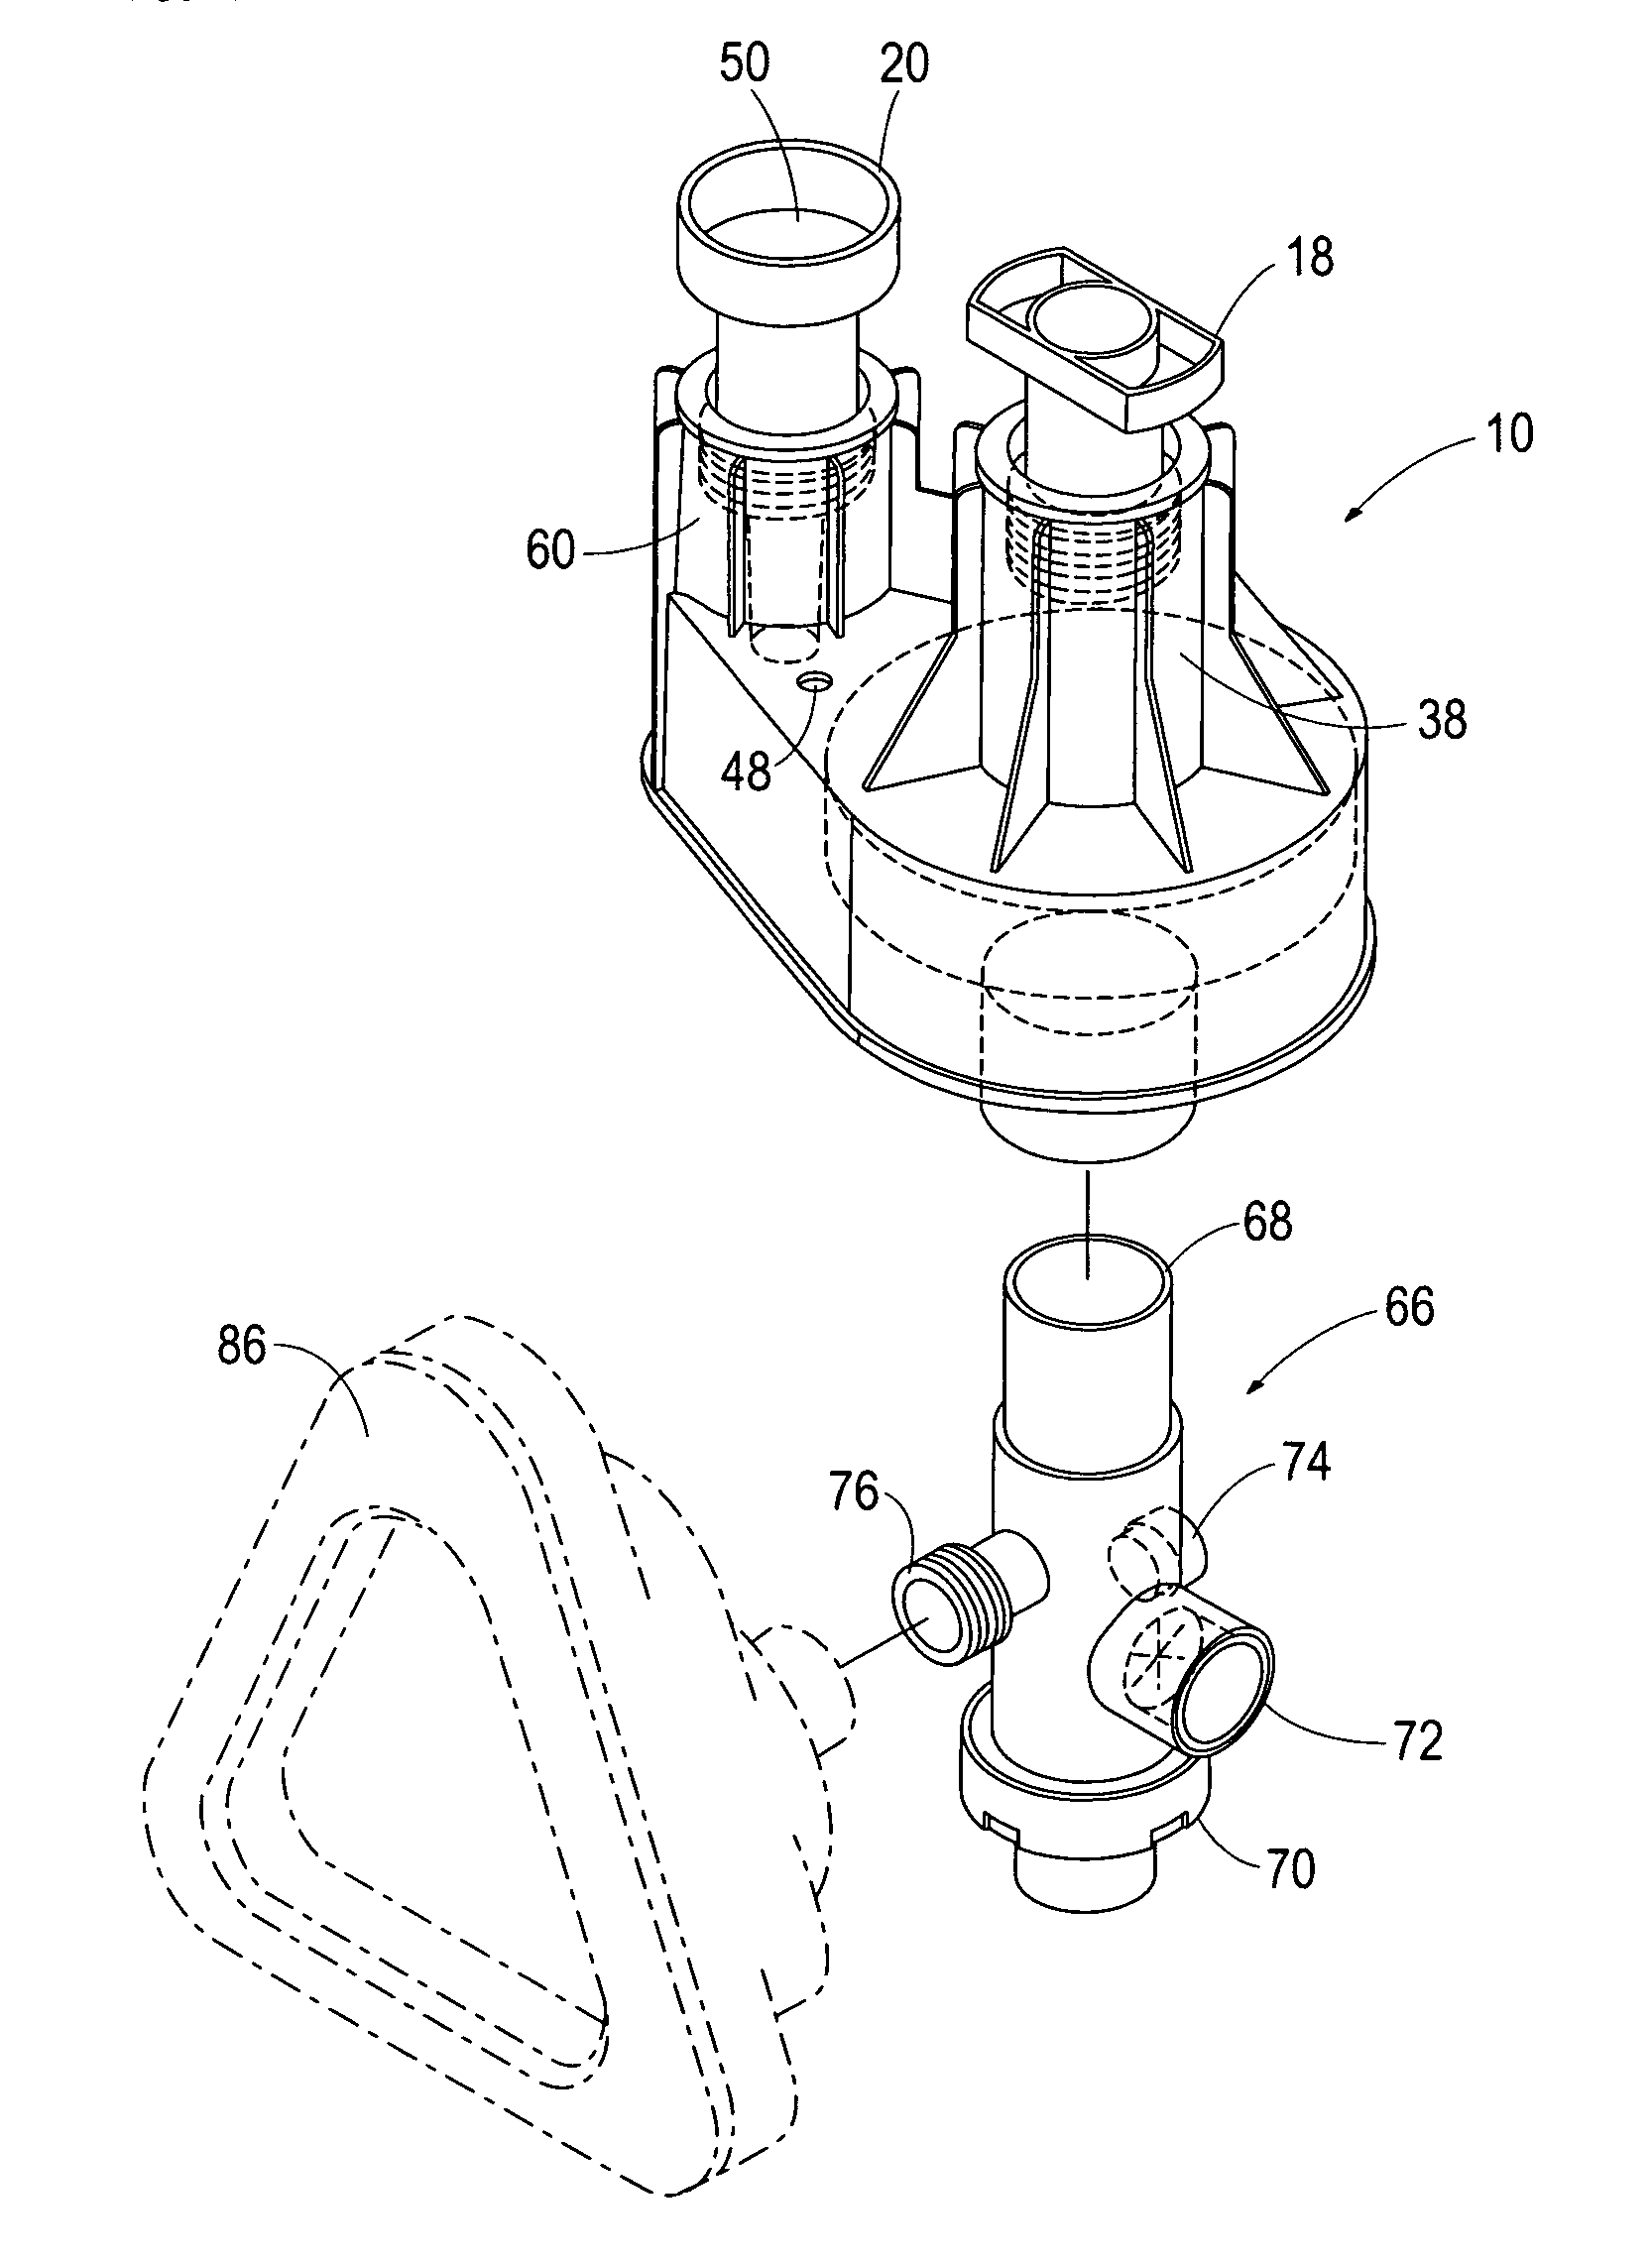 Enhanced manually actuated pressure controlled modulator technology